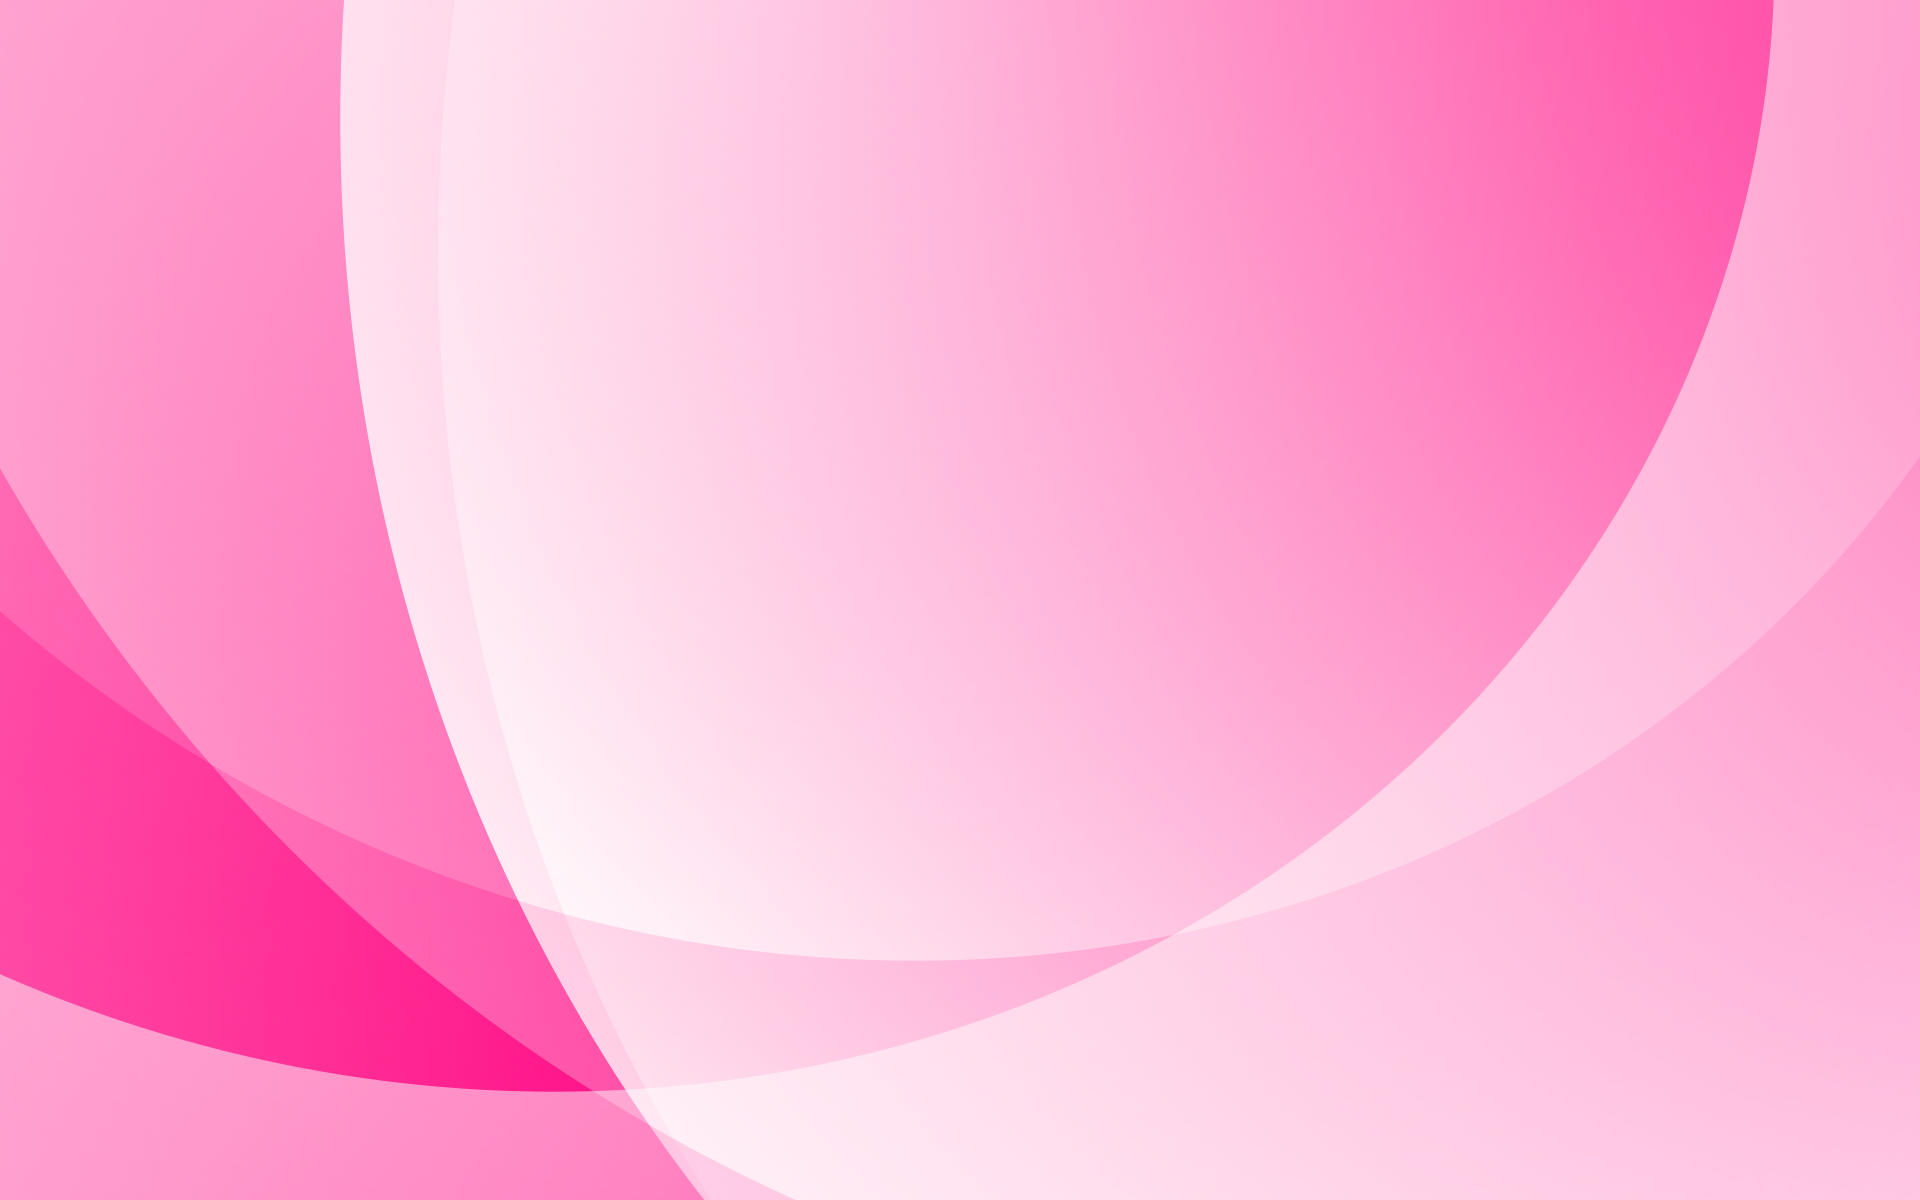 A very pink abstract wallpaper HD.